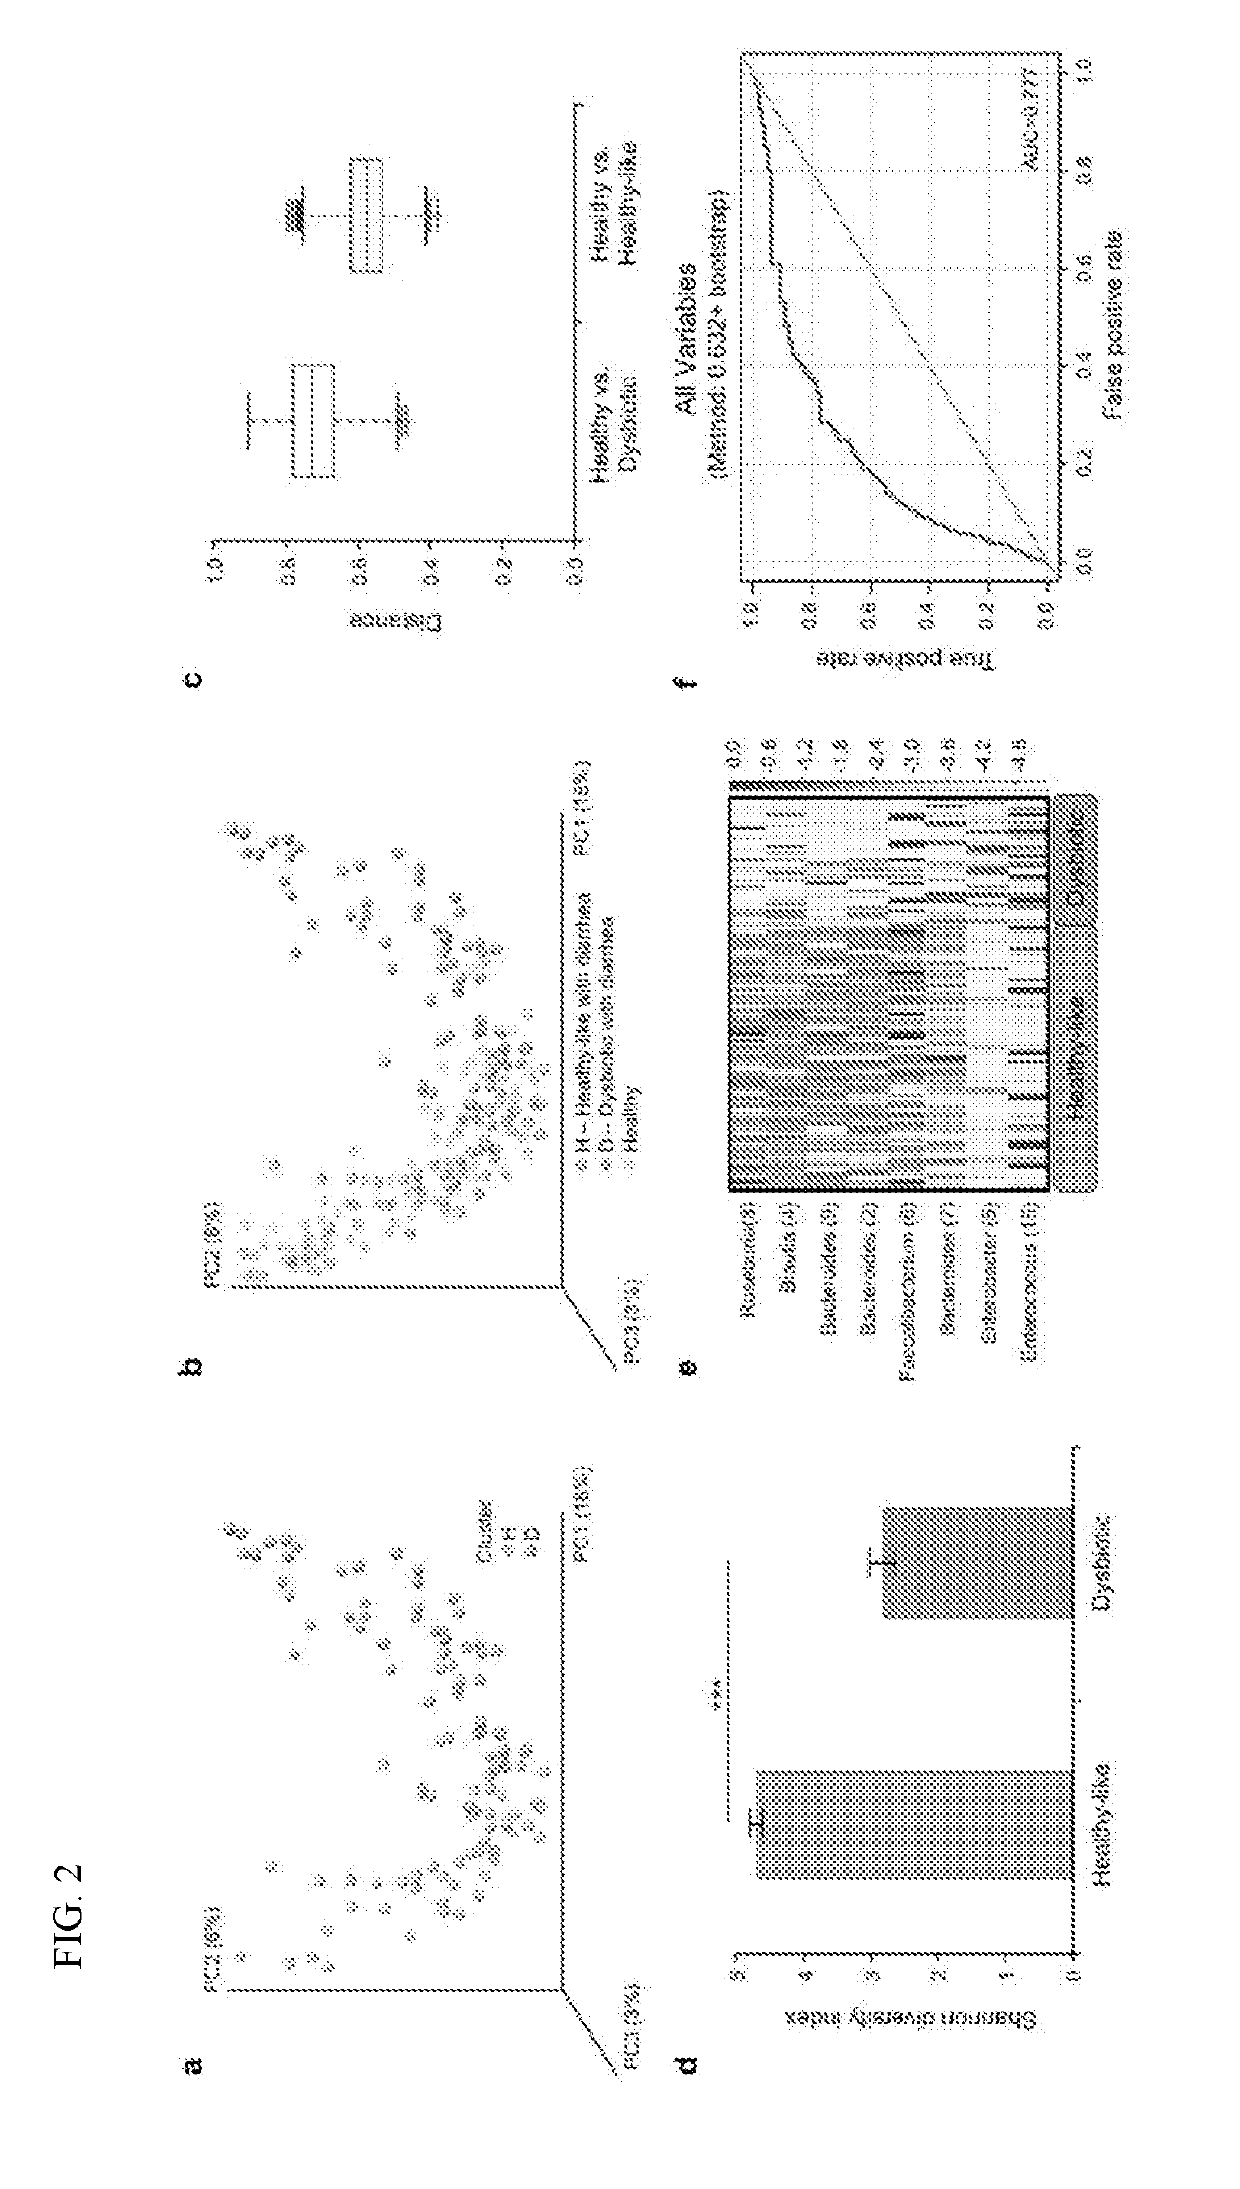 Methods and materials for using biomarkers which predict susceptibility to clostridium difficile infection